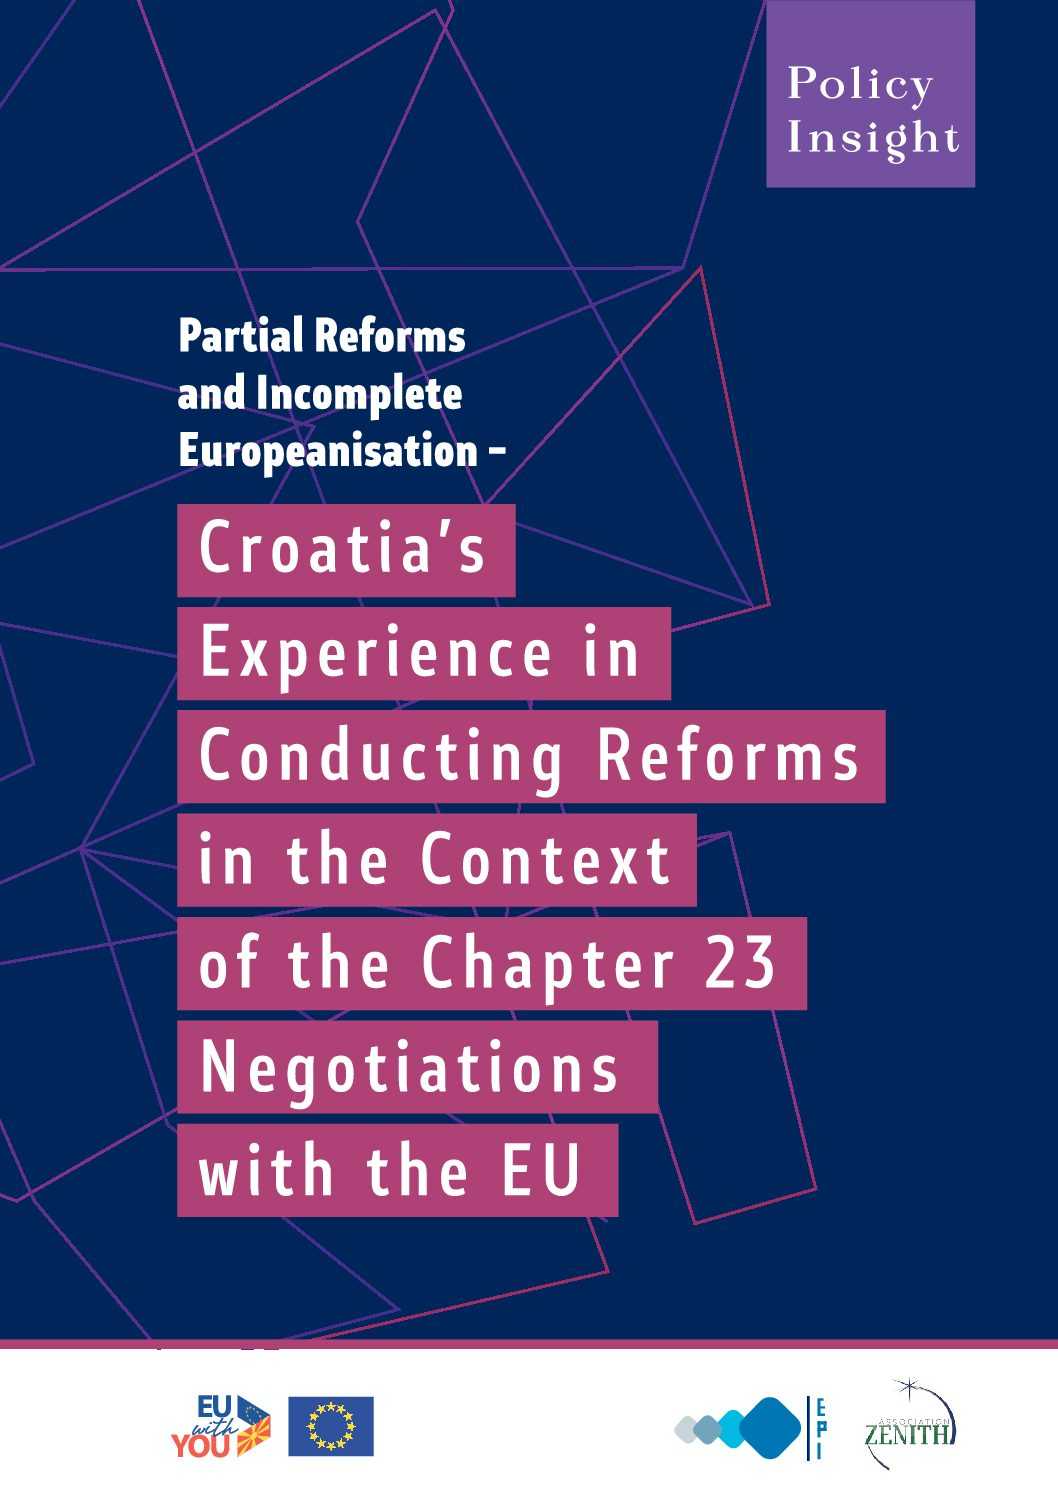 Partial Reforms and Incomplete Europeanisation – Croatia’s Experience in Conducting Reforms in the Context of the Chapter 23 Negotiations with the EU